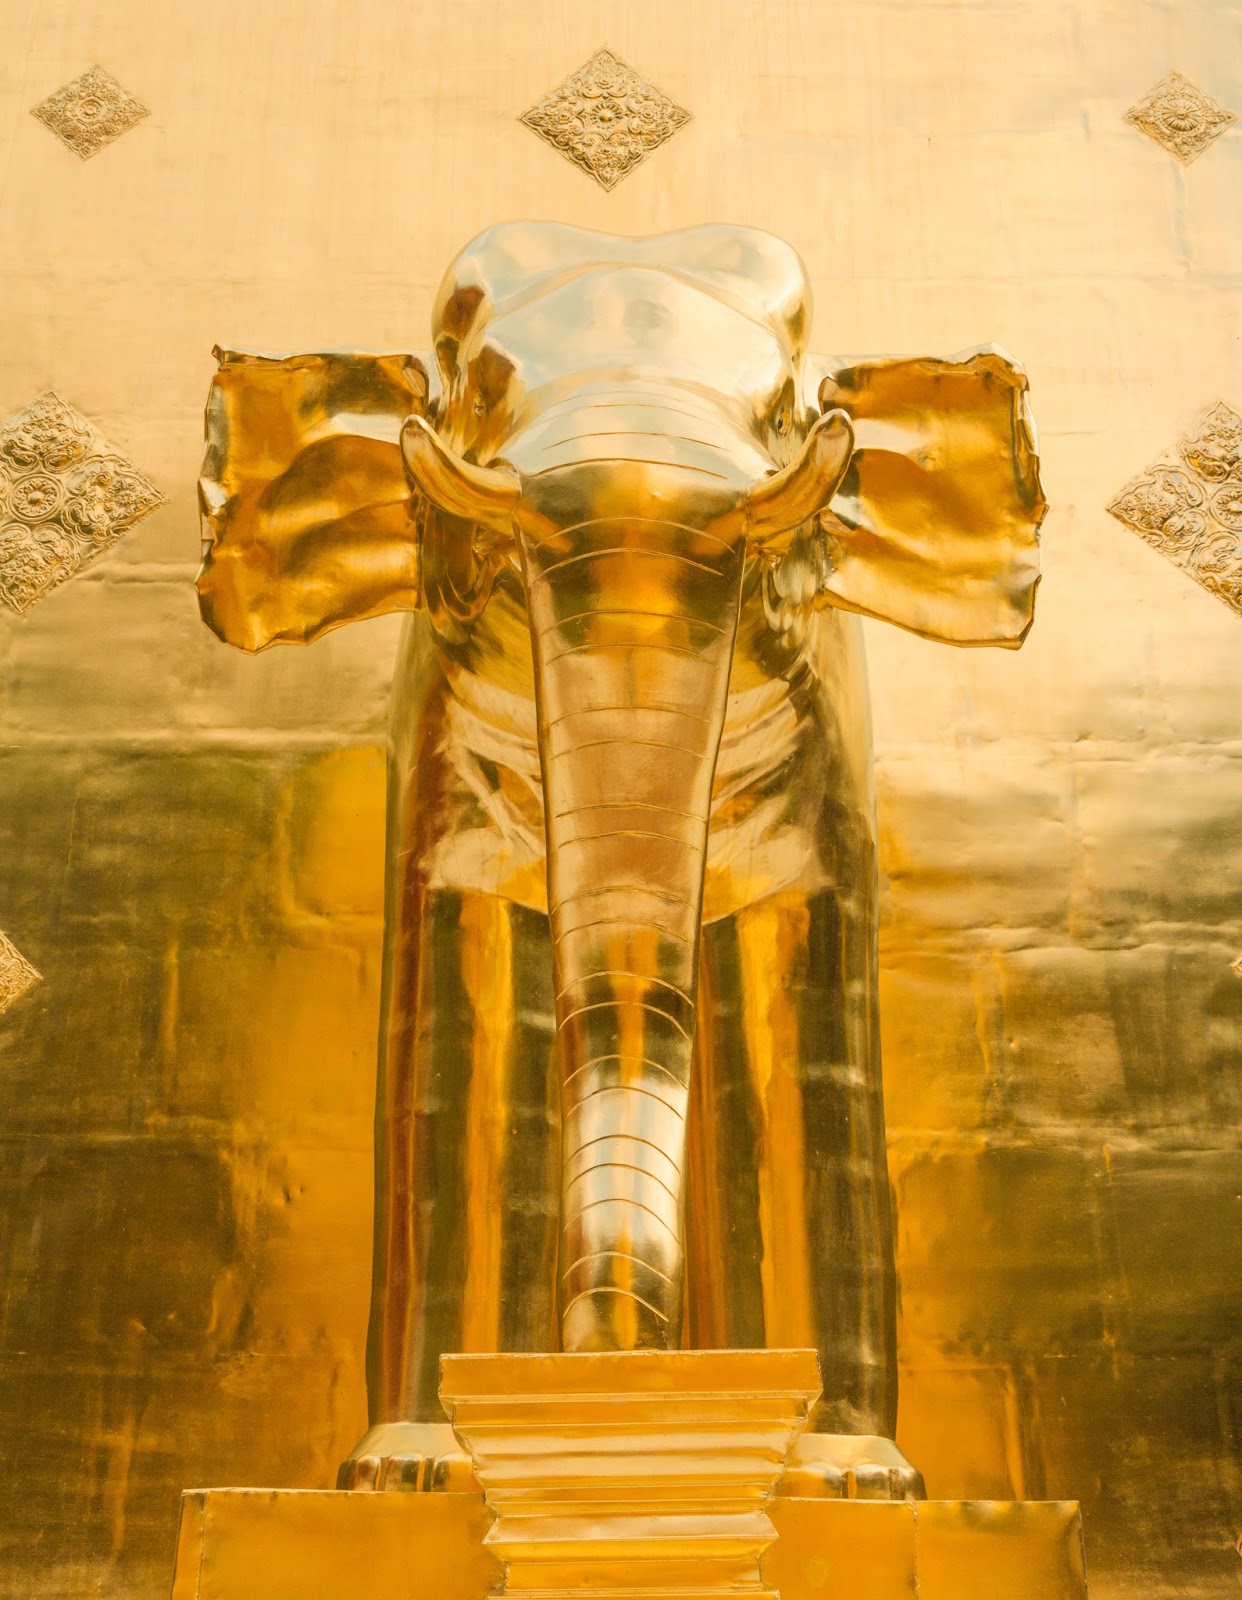 Gold Elephant at Wat Phra Singh Temple, Chiang Mai Thailand